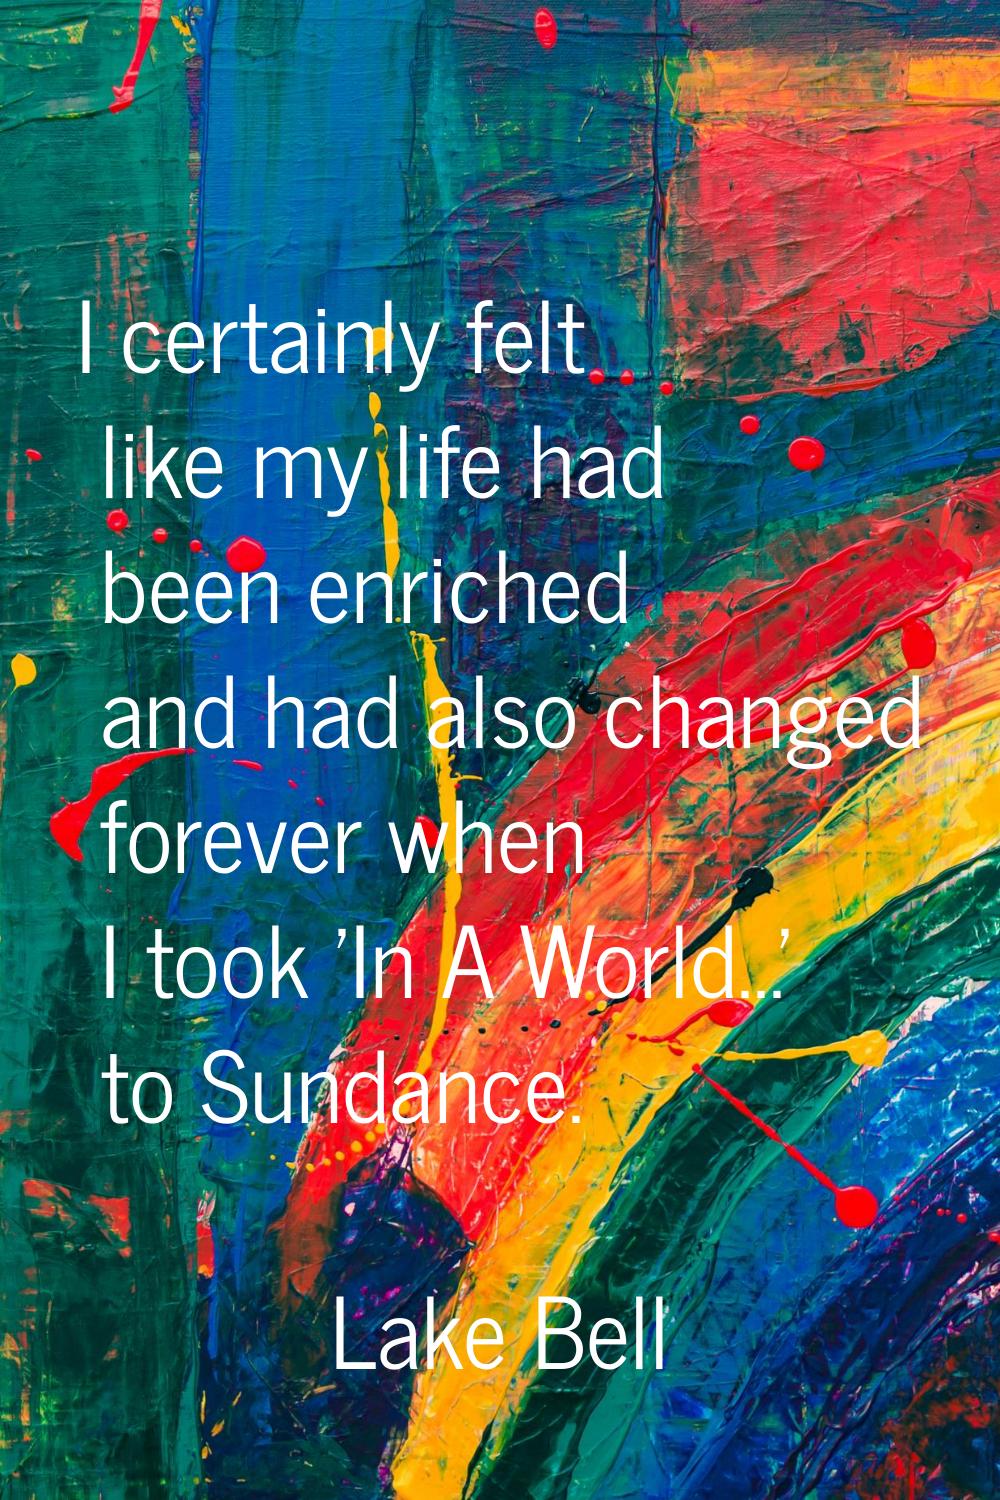 I certainly felt like my life had been enriched and had also changed forever when I took 'In A Worl